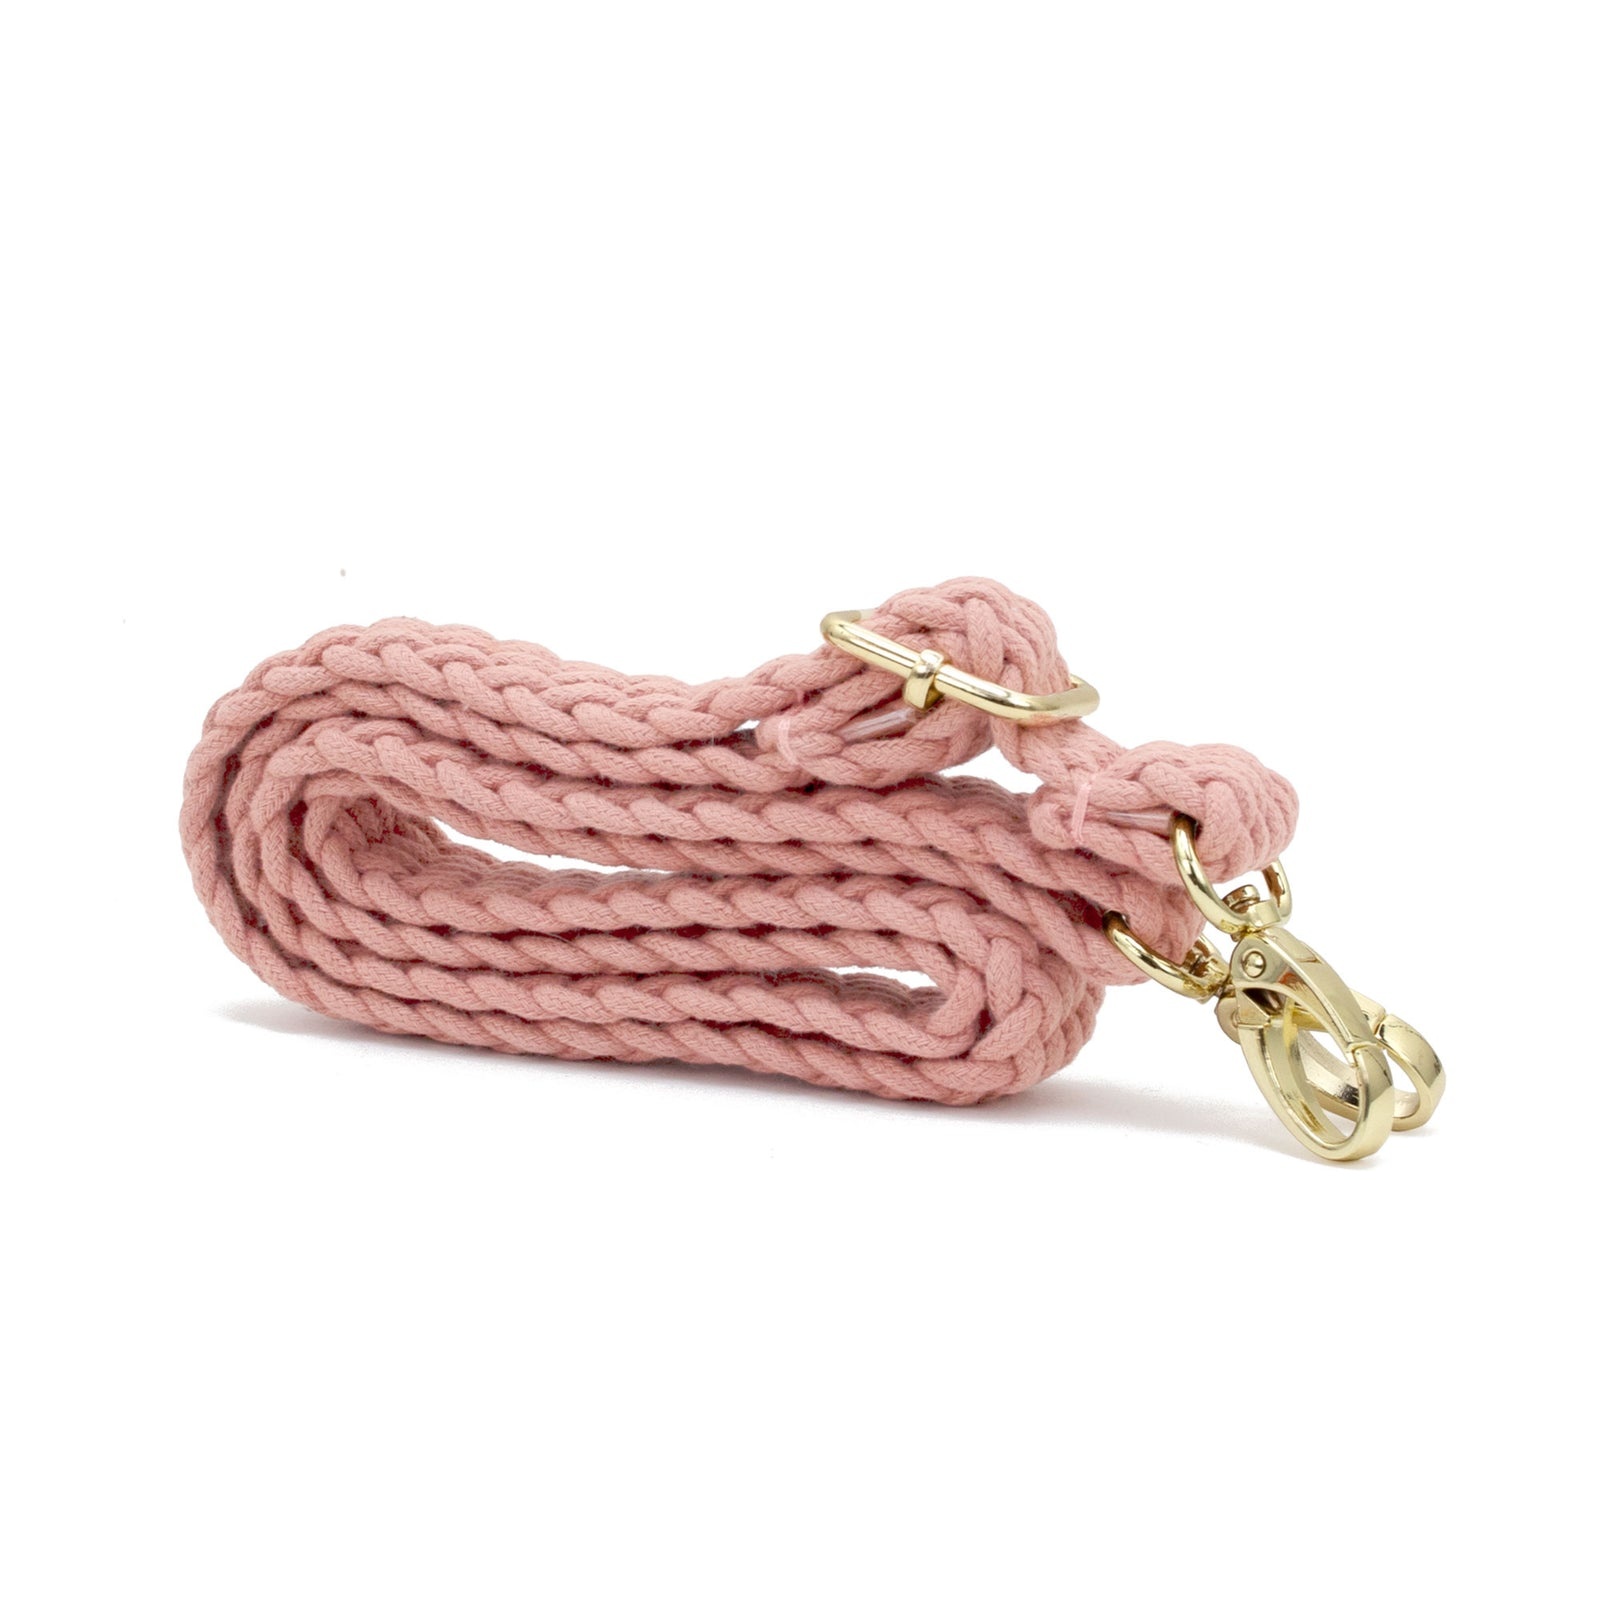 SoYoung Inc Braided Strap